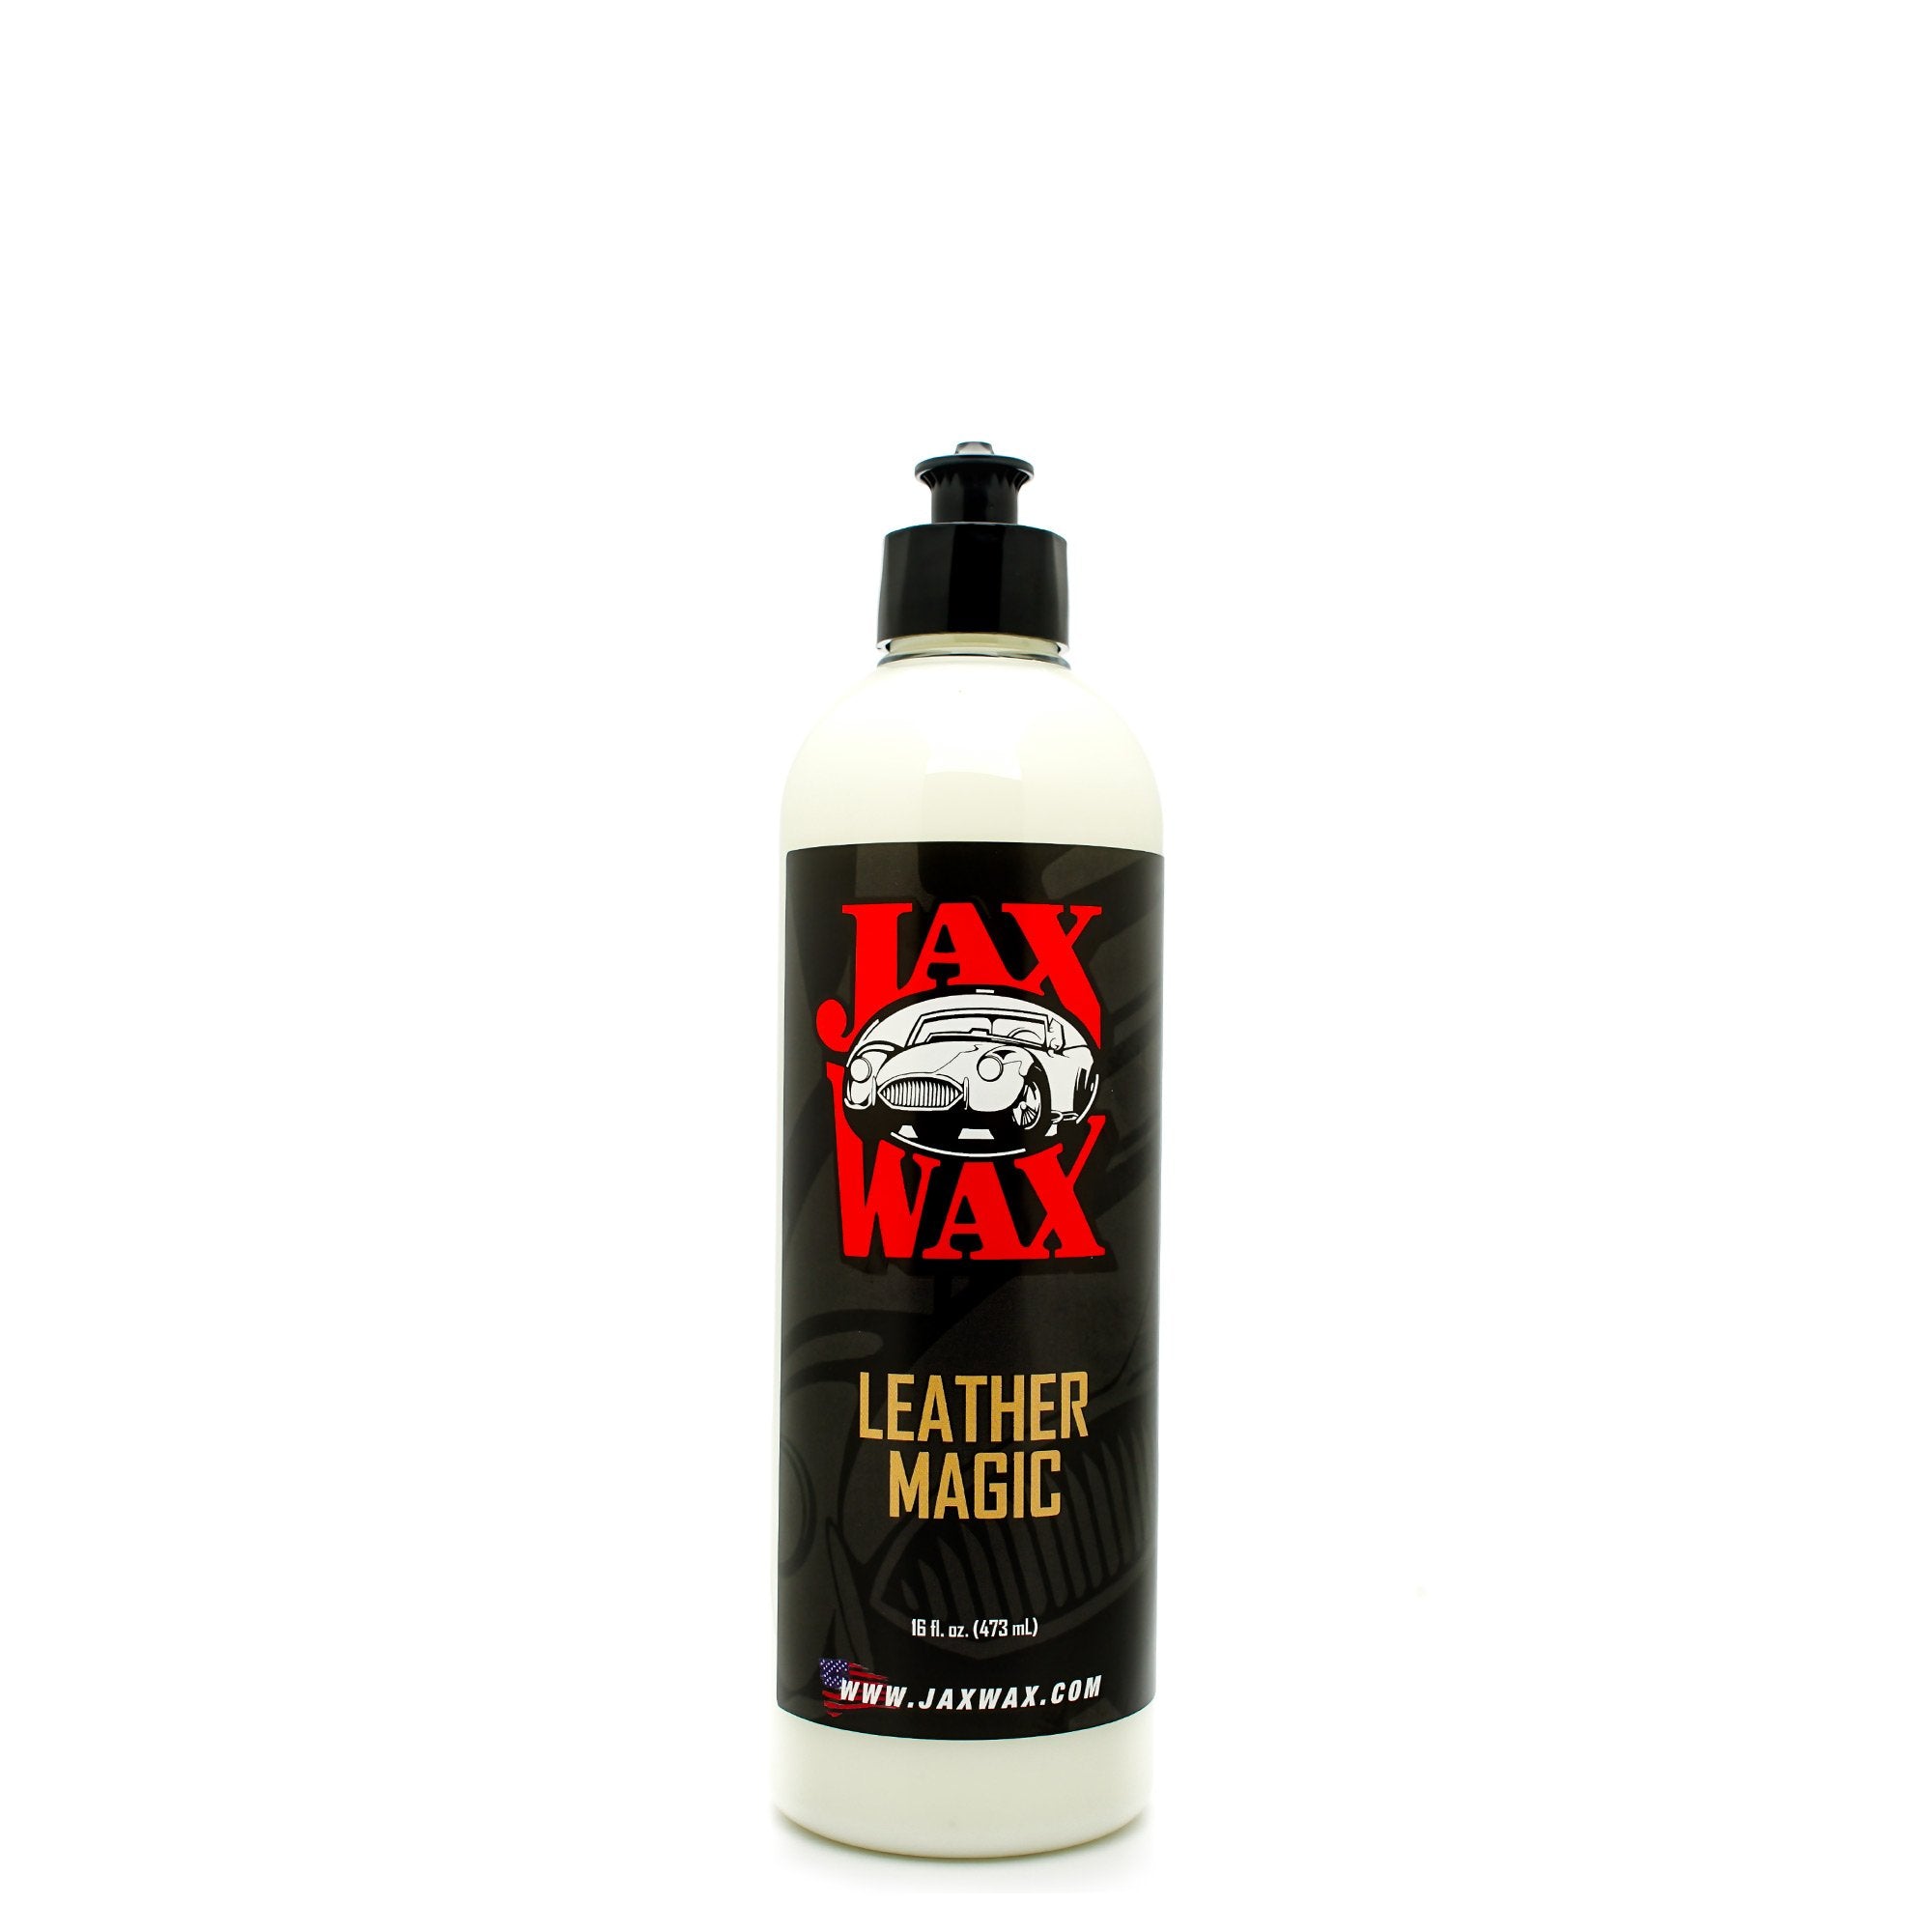 LEATHER MAGIC CLEANER AND CONDITIONER